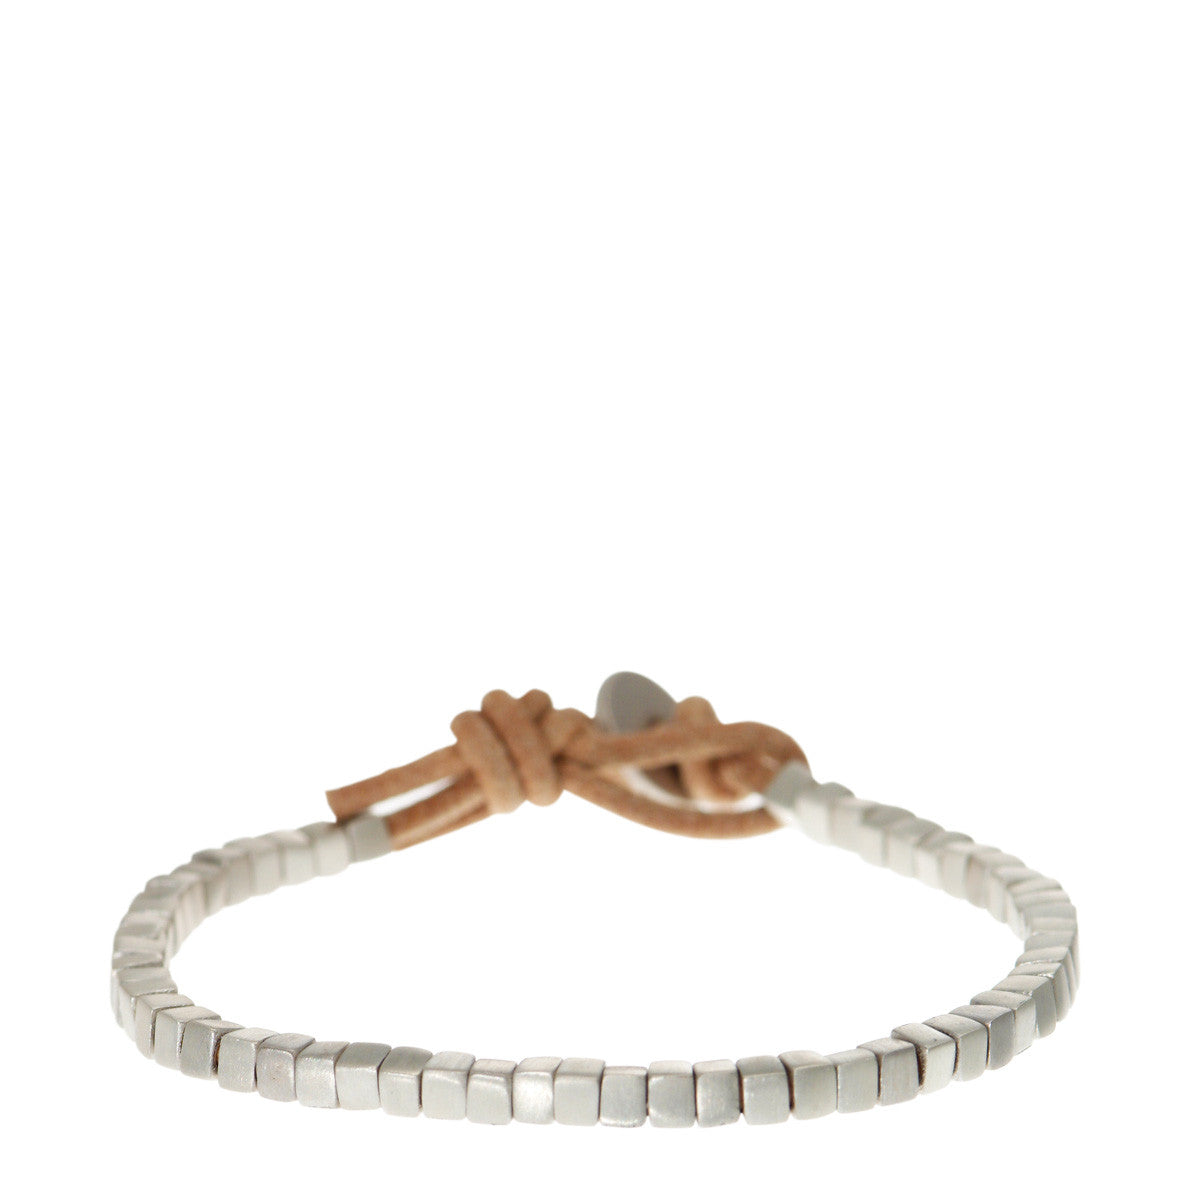 Sterling Silver Square Bead Bracelet on Natural Leather